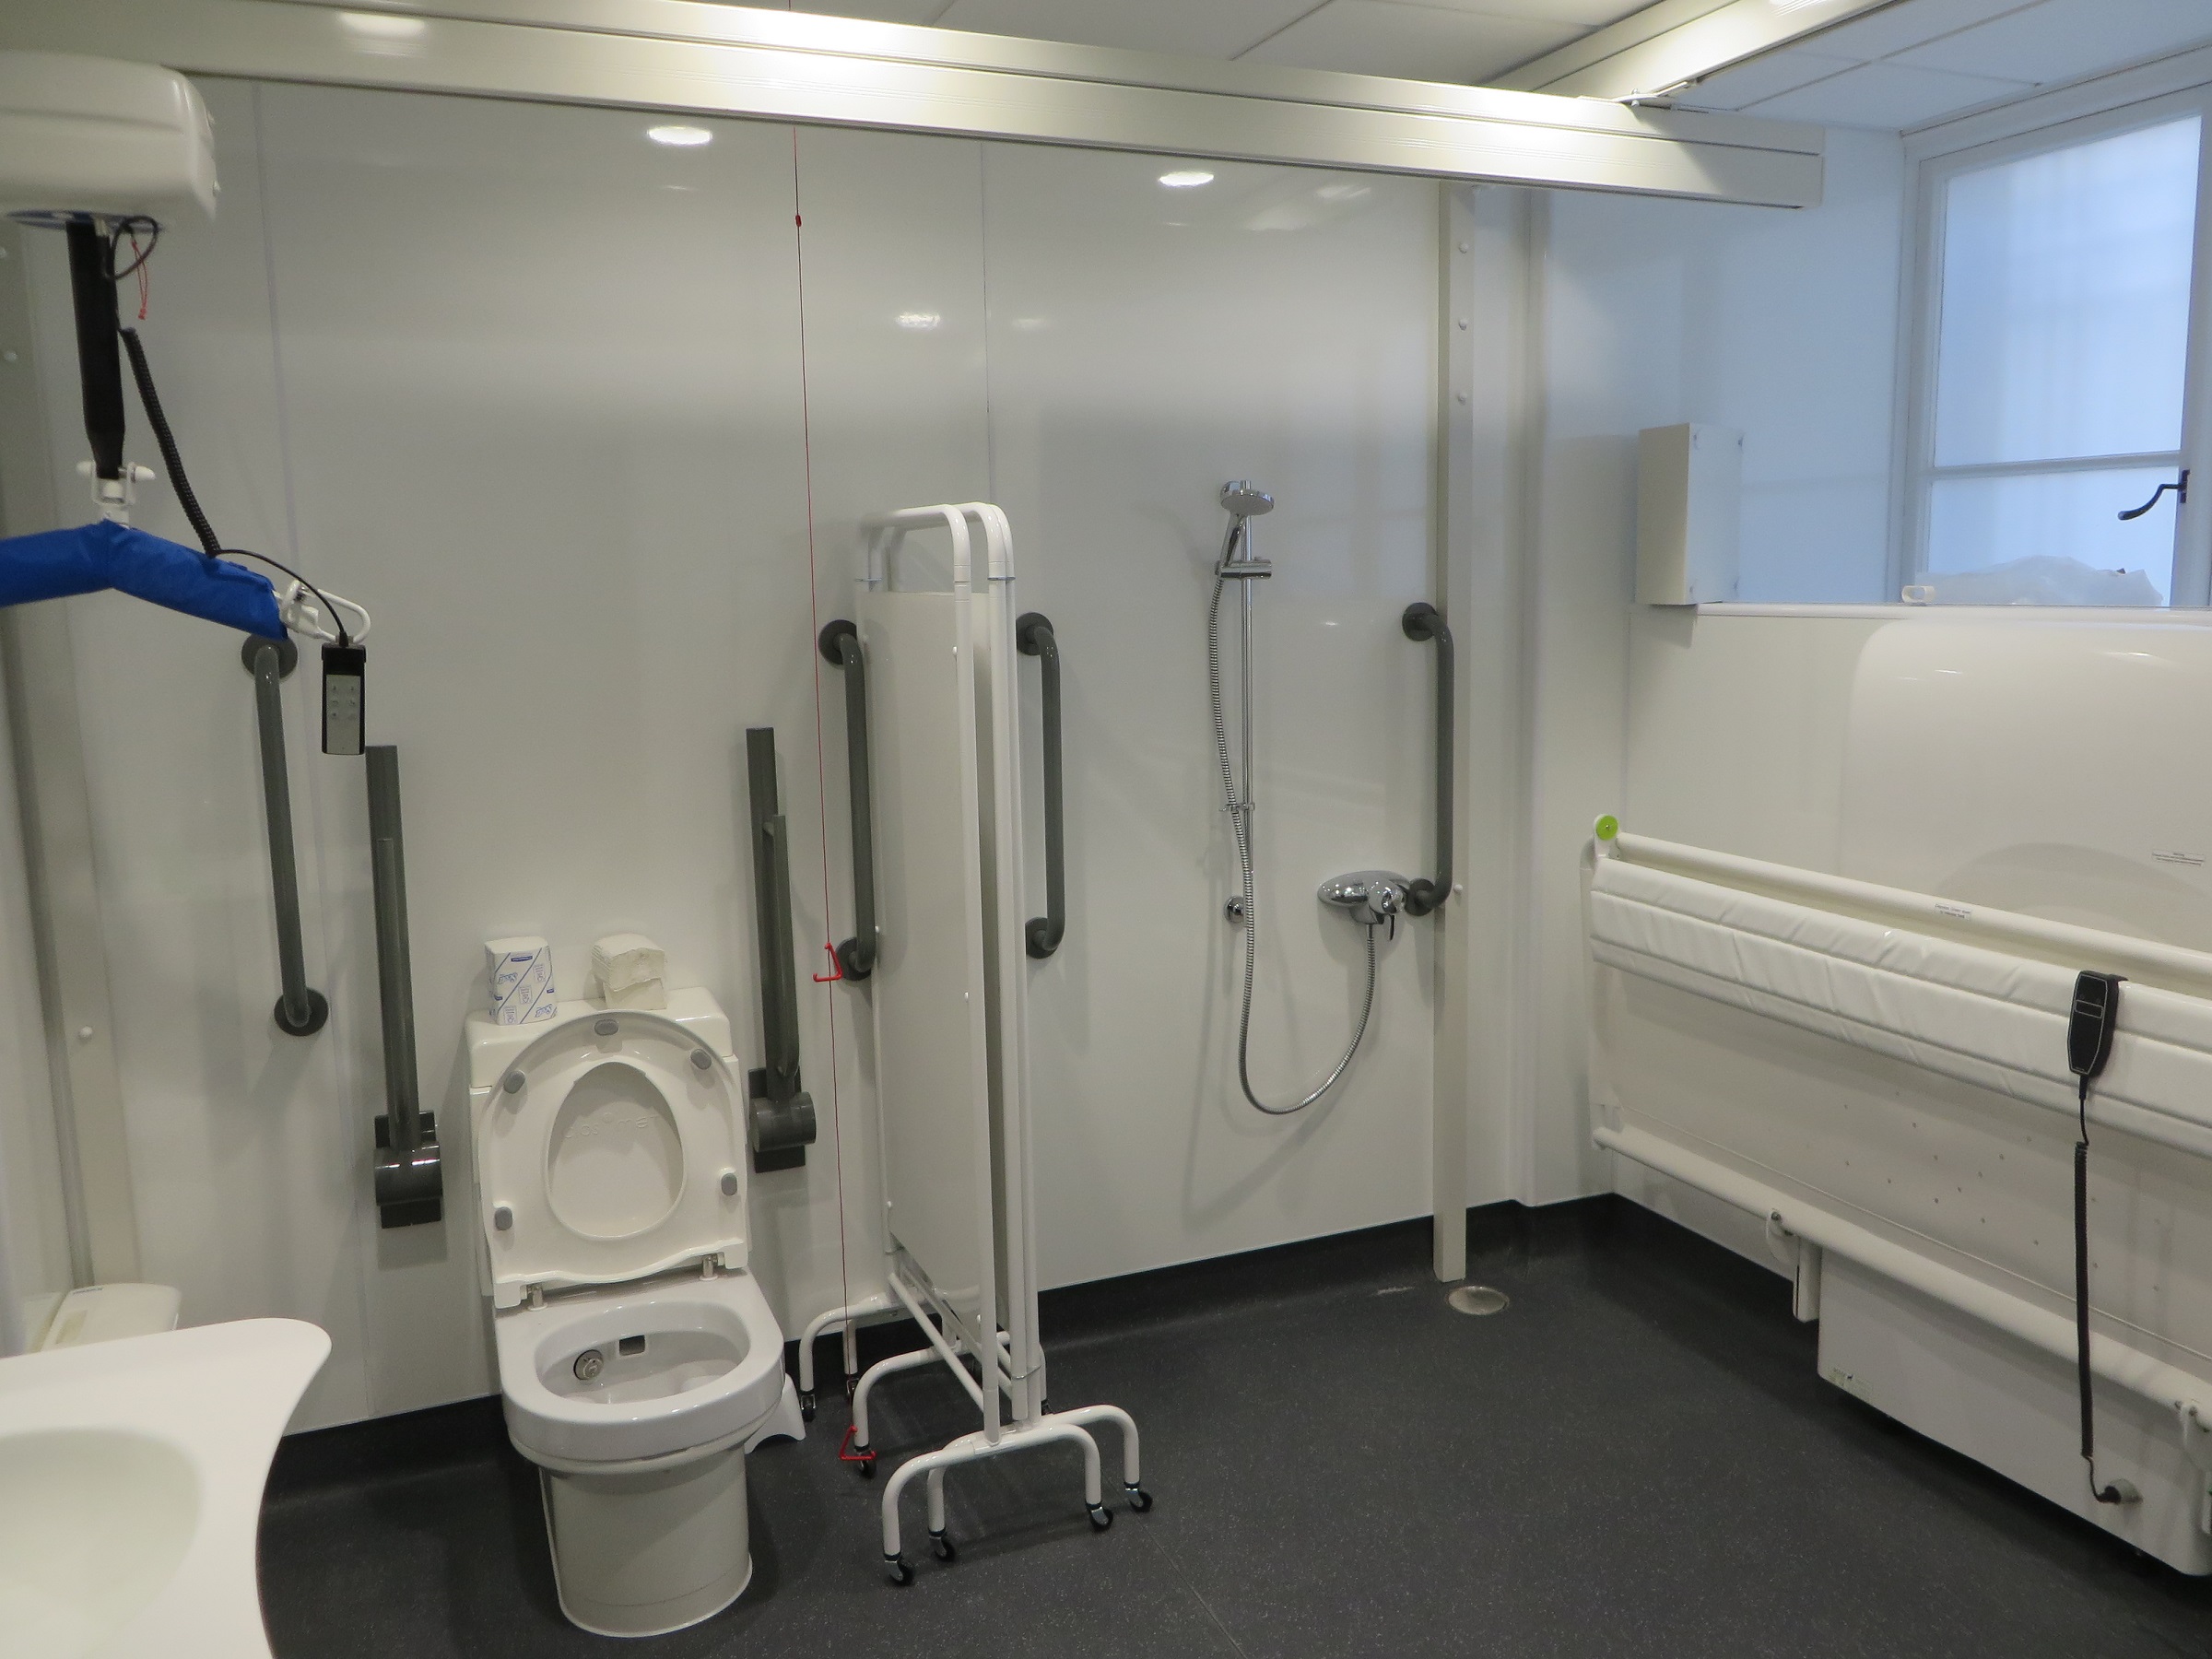 Proposals to introduce Changing Places Toilets through Scottish Building Regulations